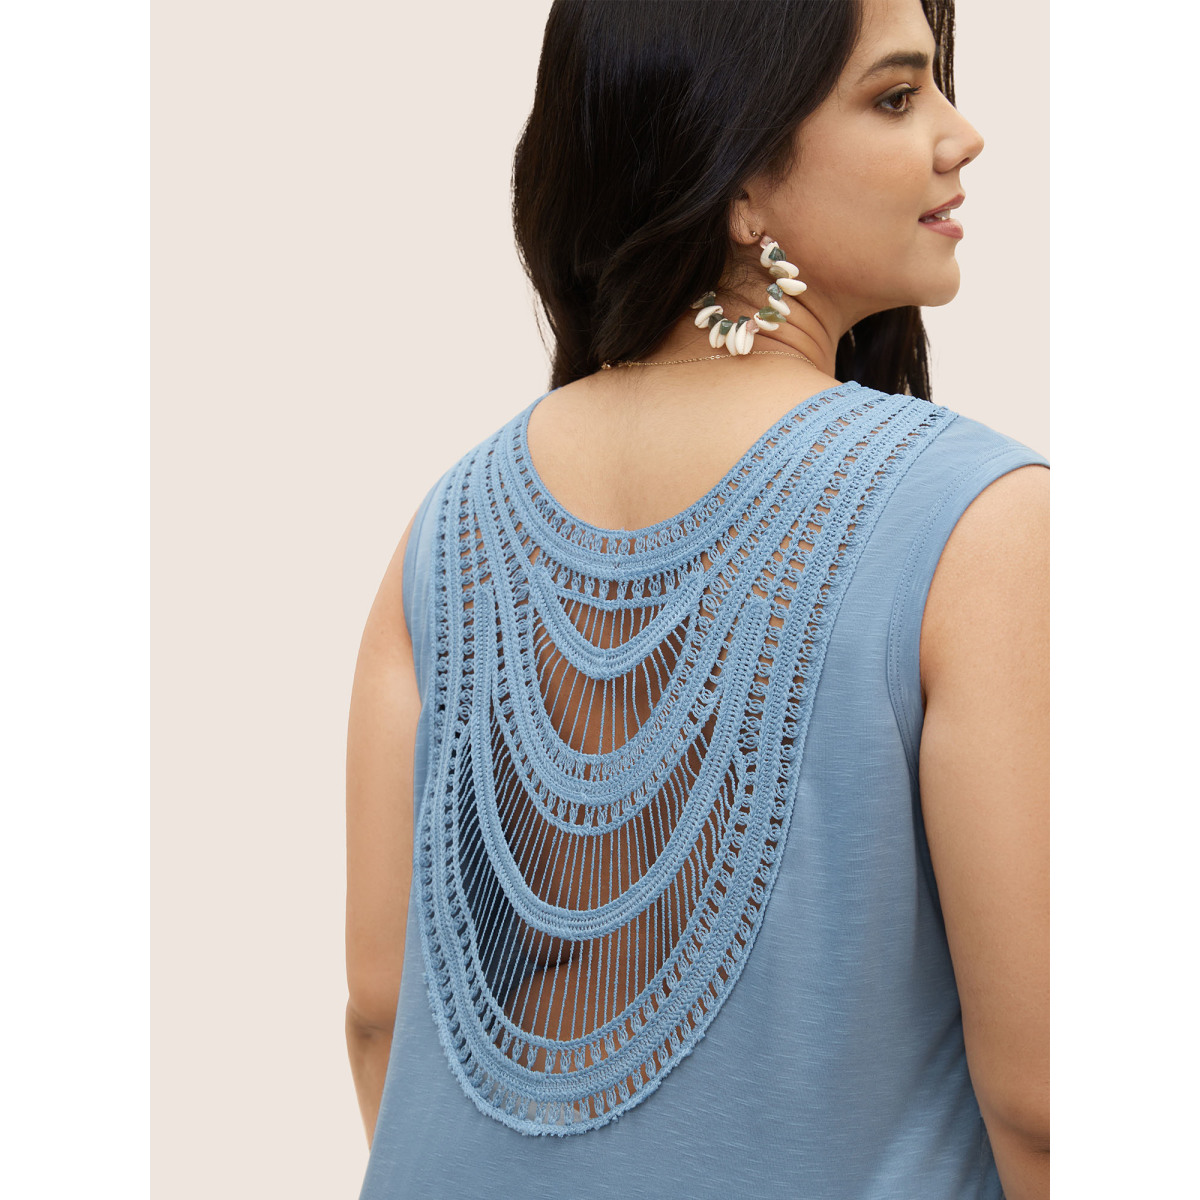 

Plus Size Notched Collar Plain Cut Out Tank Top Women Cerulean Resort Patchwork Notched collar Vacation Tank Tops Camis BloomChic